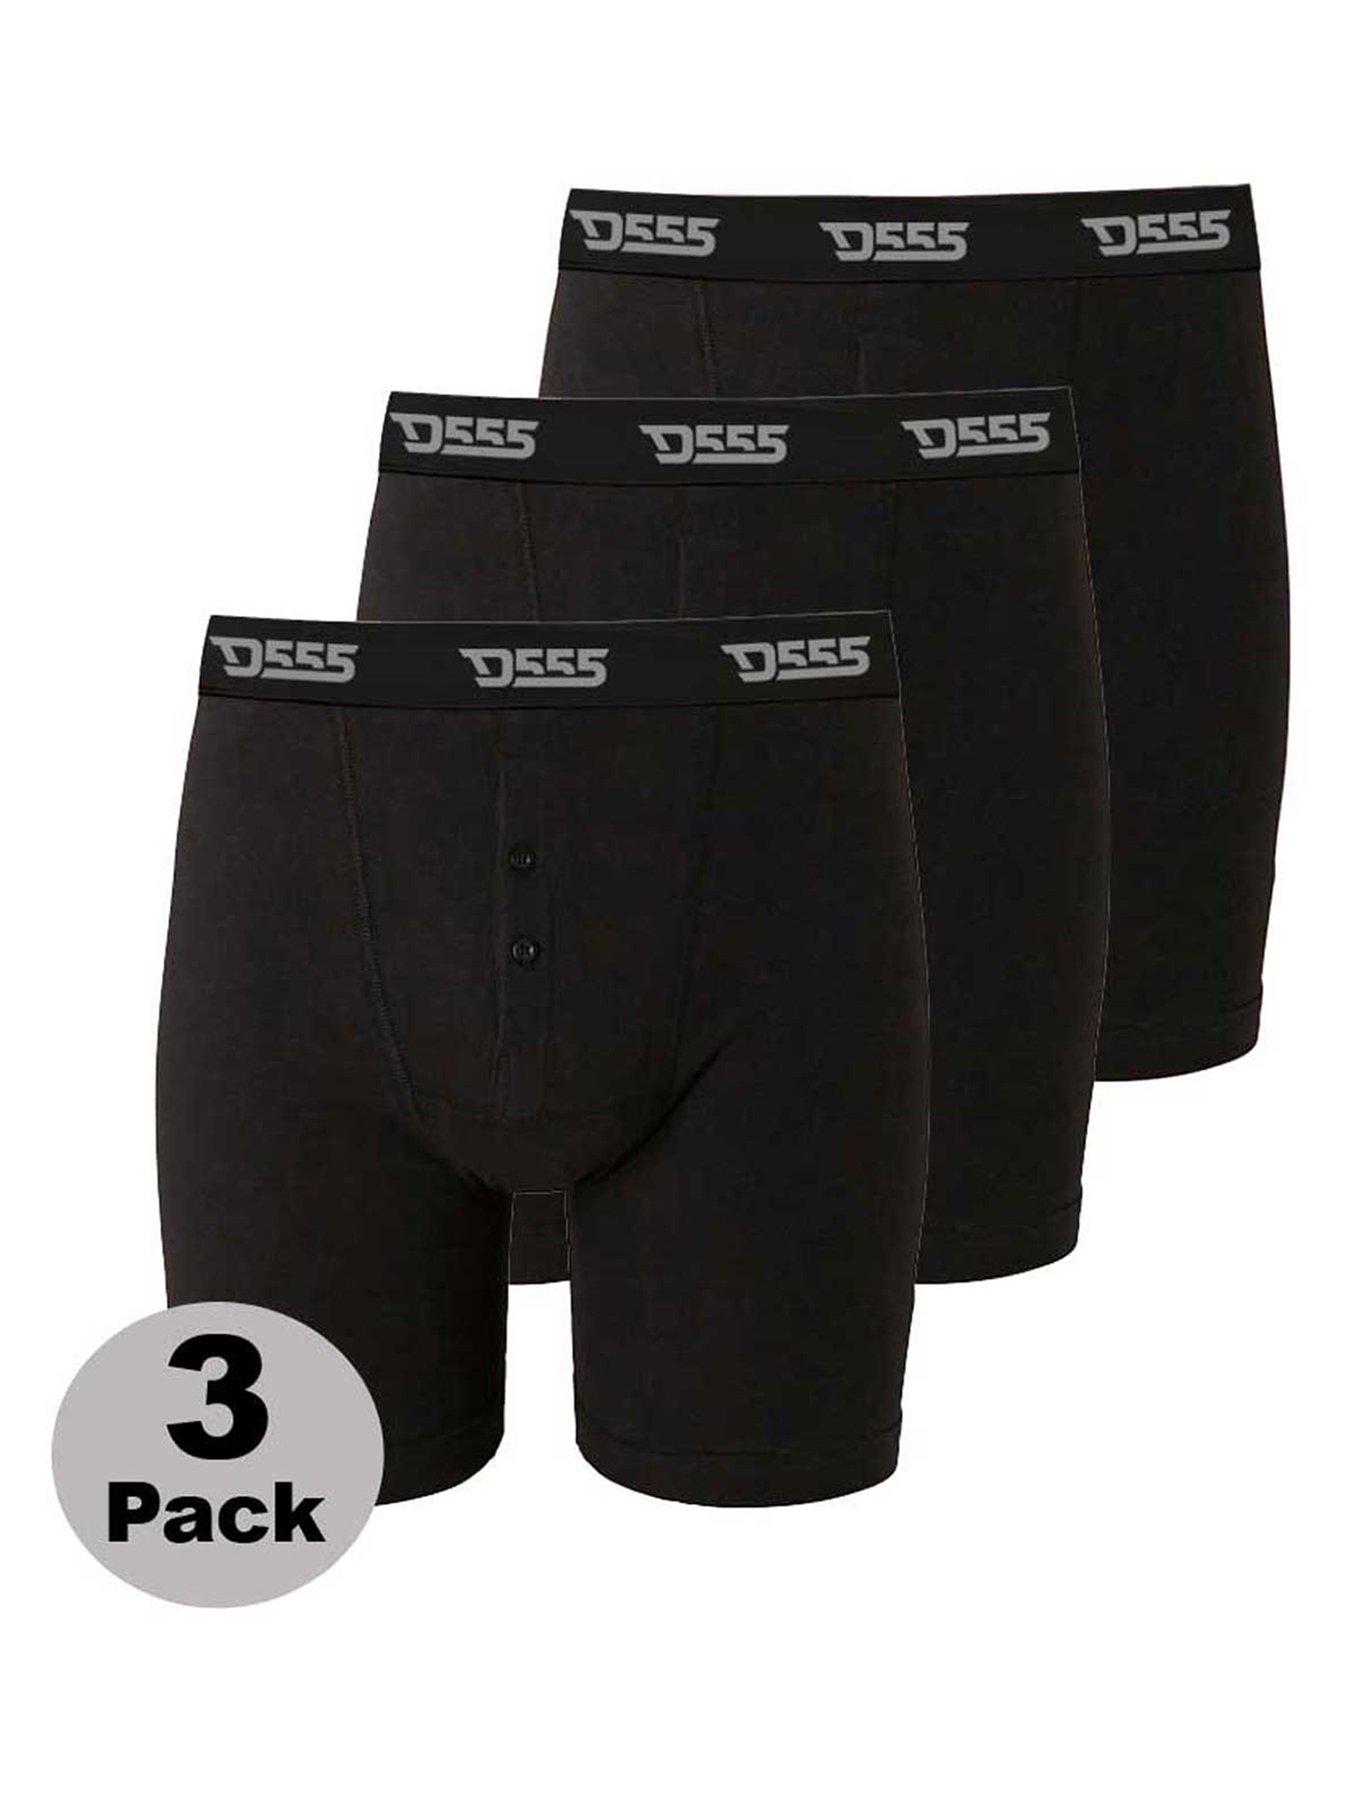 adidas Performance Long Boxer Brief Underwear (3-Pack) Boxed